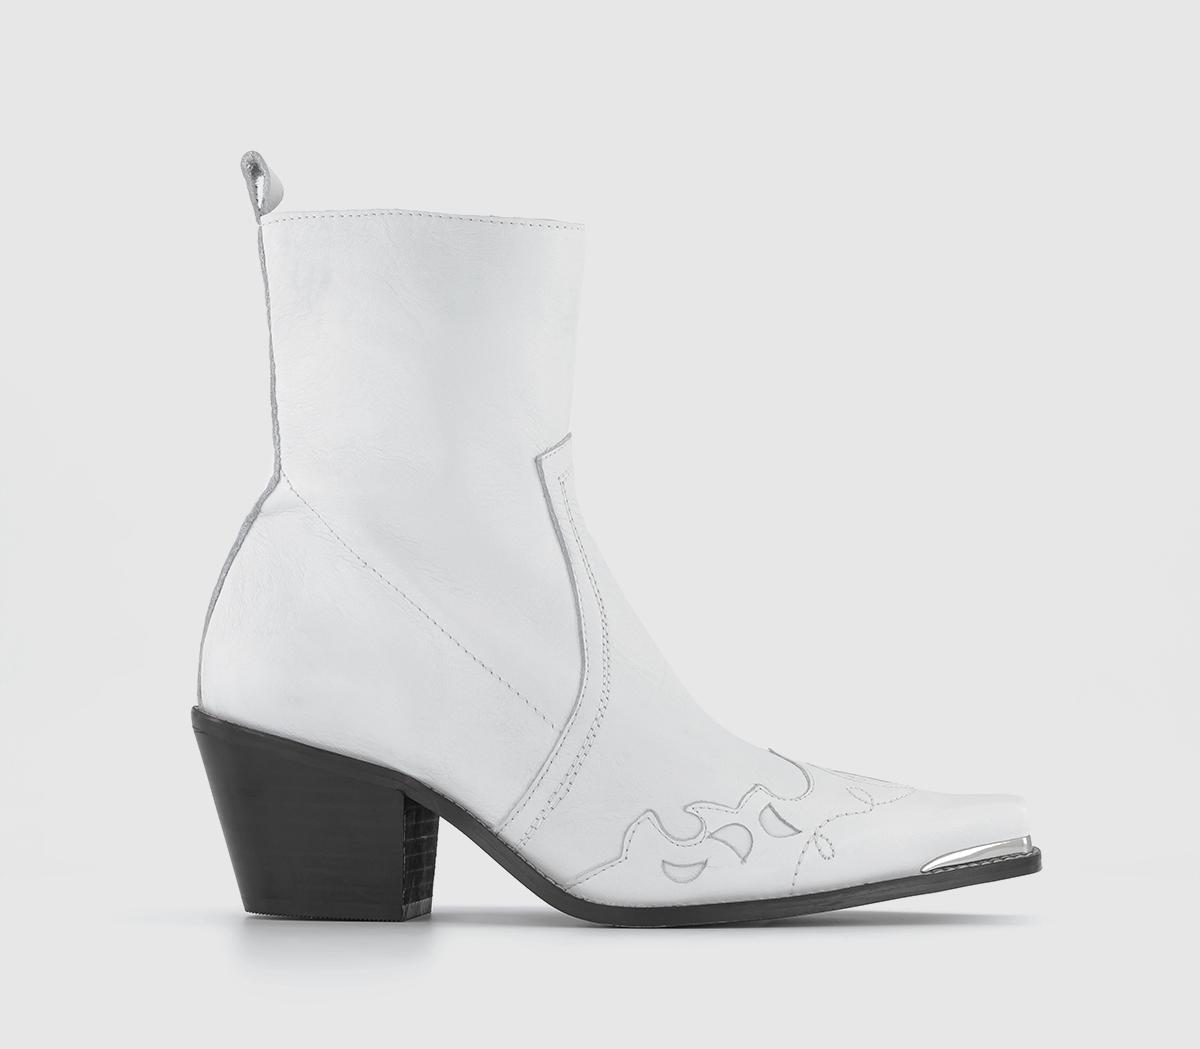 OFFICEAlbuquerque Western Heeled Ankle BootsWhite Leather